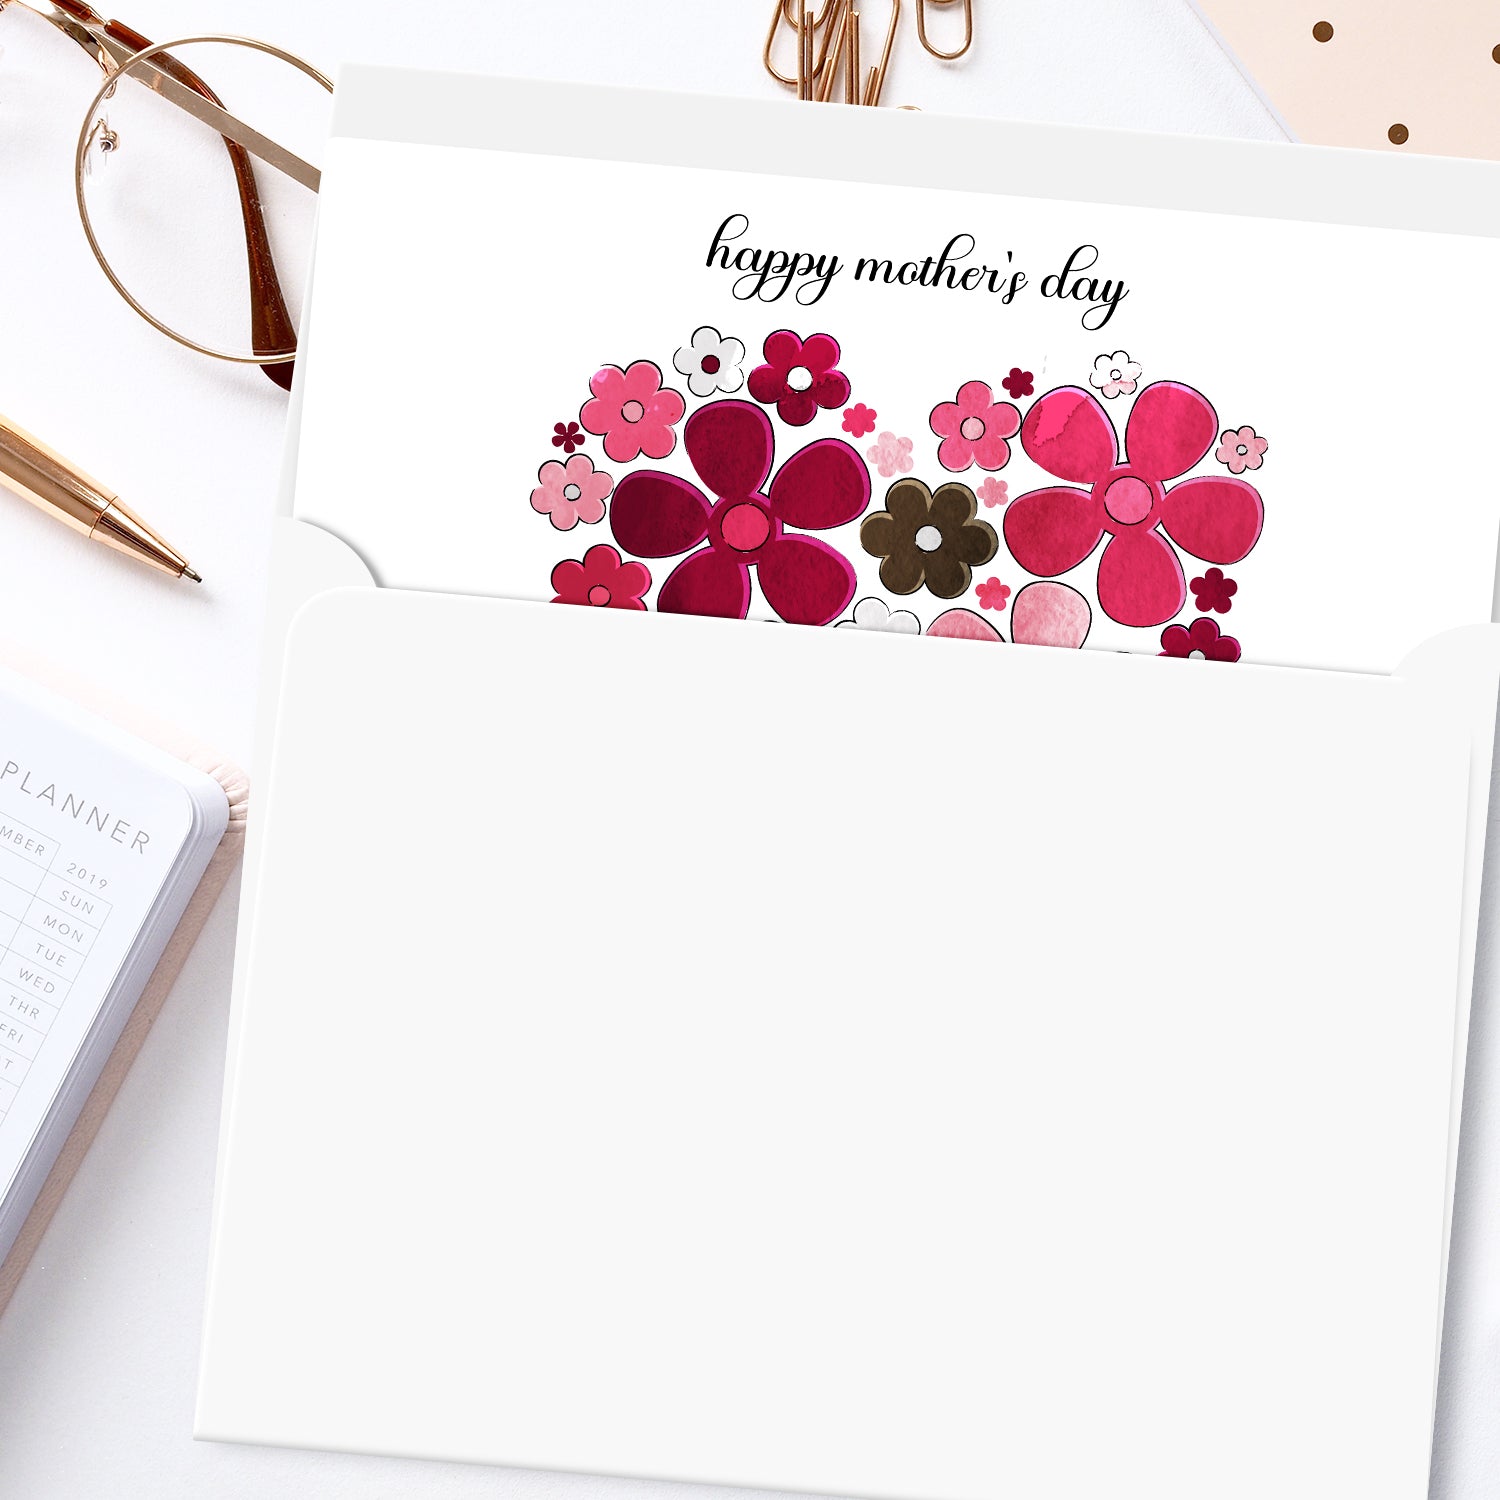 Happy Mother's Day, We Love You So Much! Thank You Greeting Cards and Envelopes for Mom, Wife | 4.25 x 5.5 | 10 per Pack